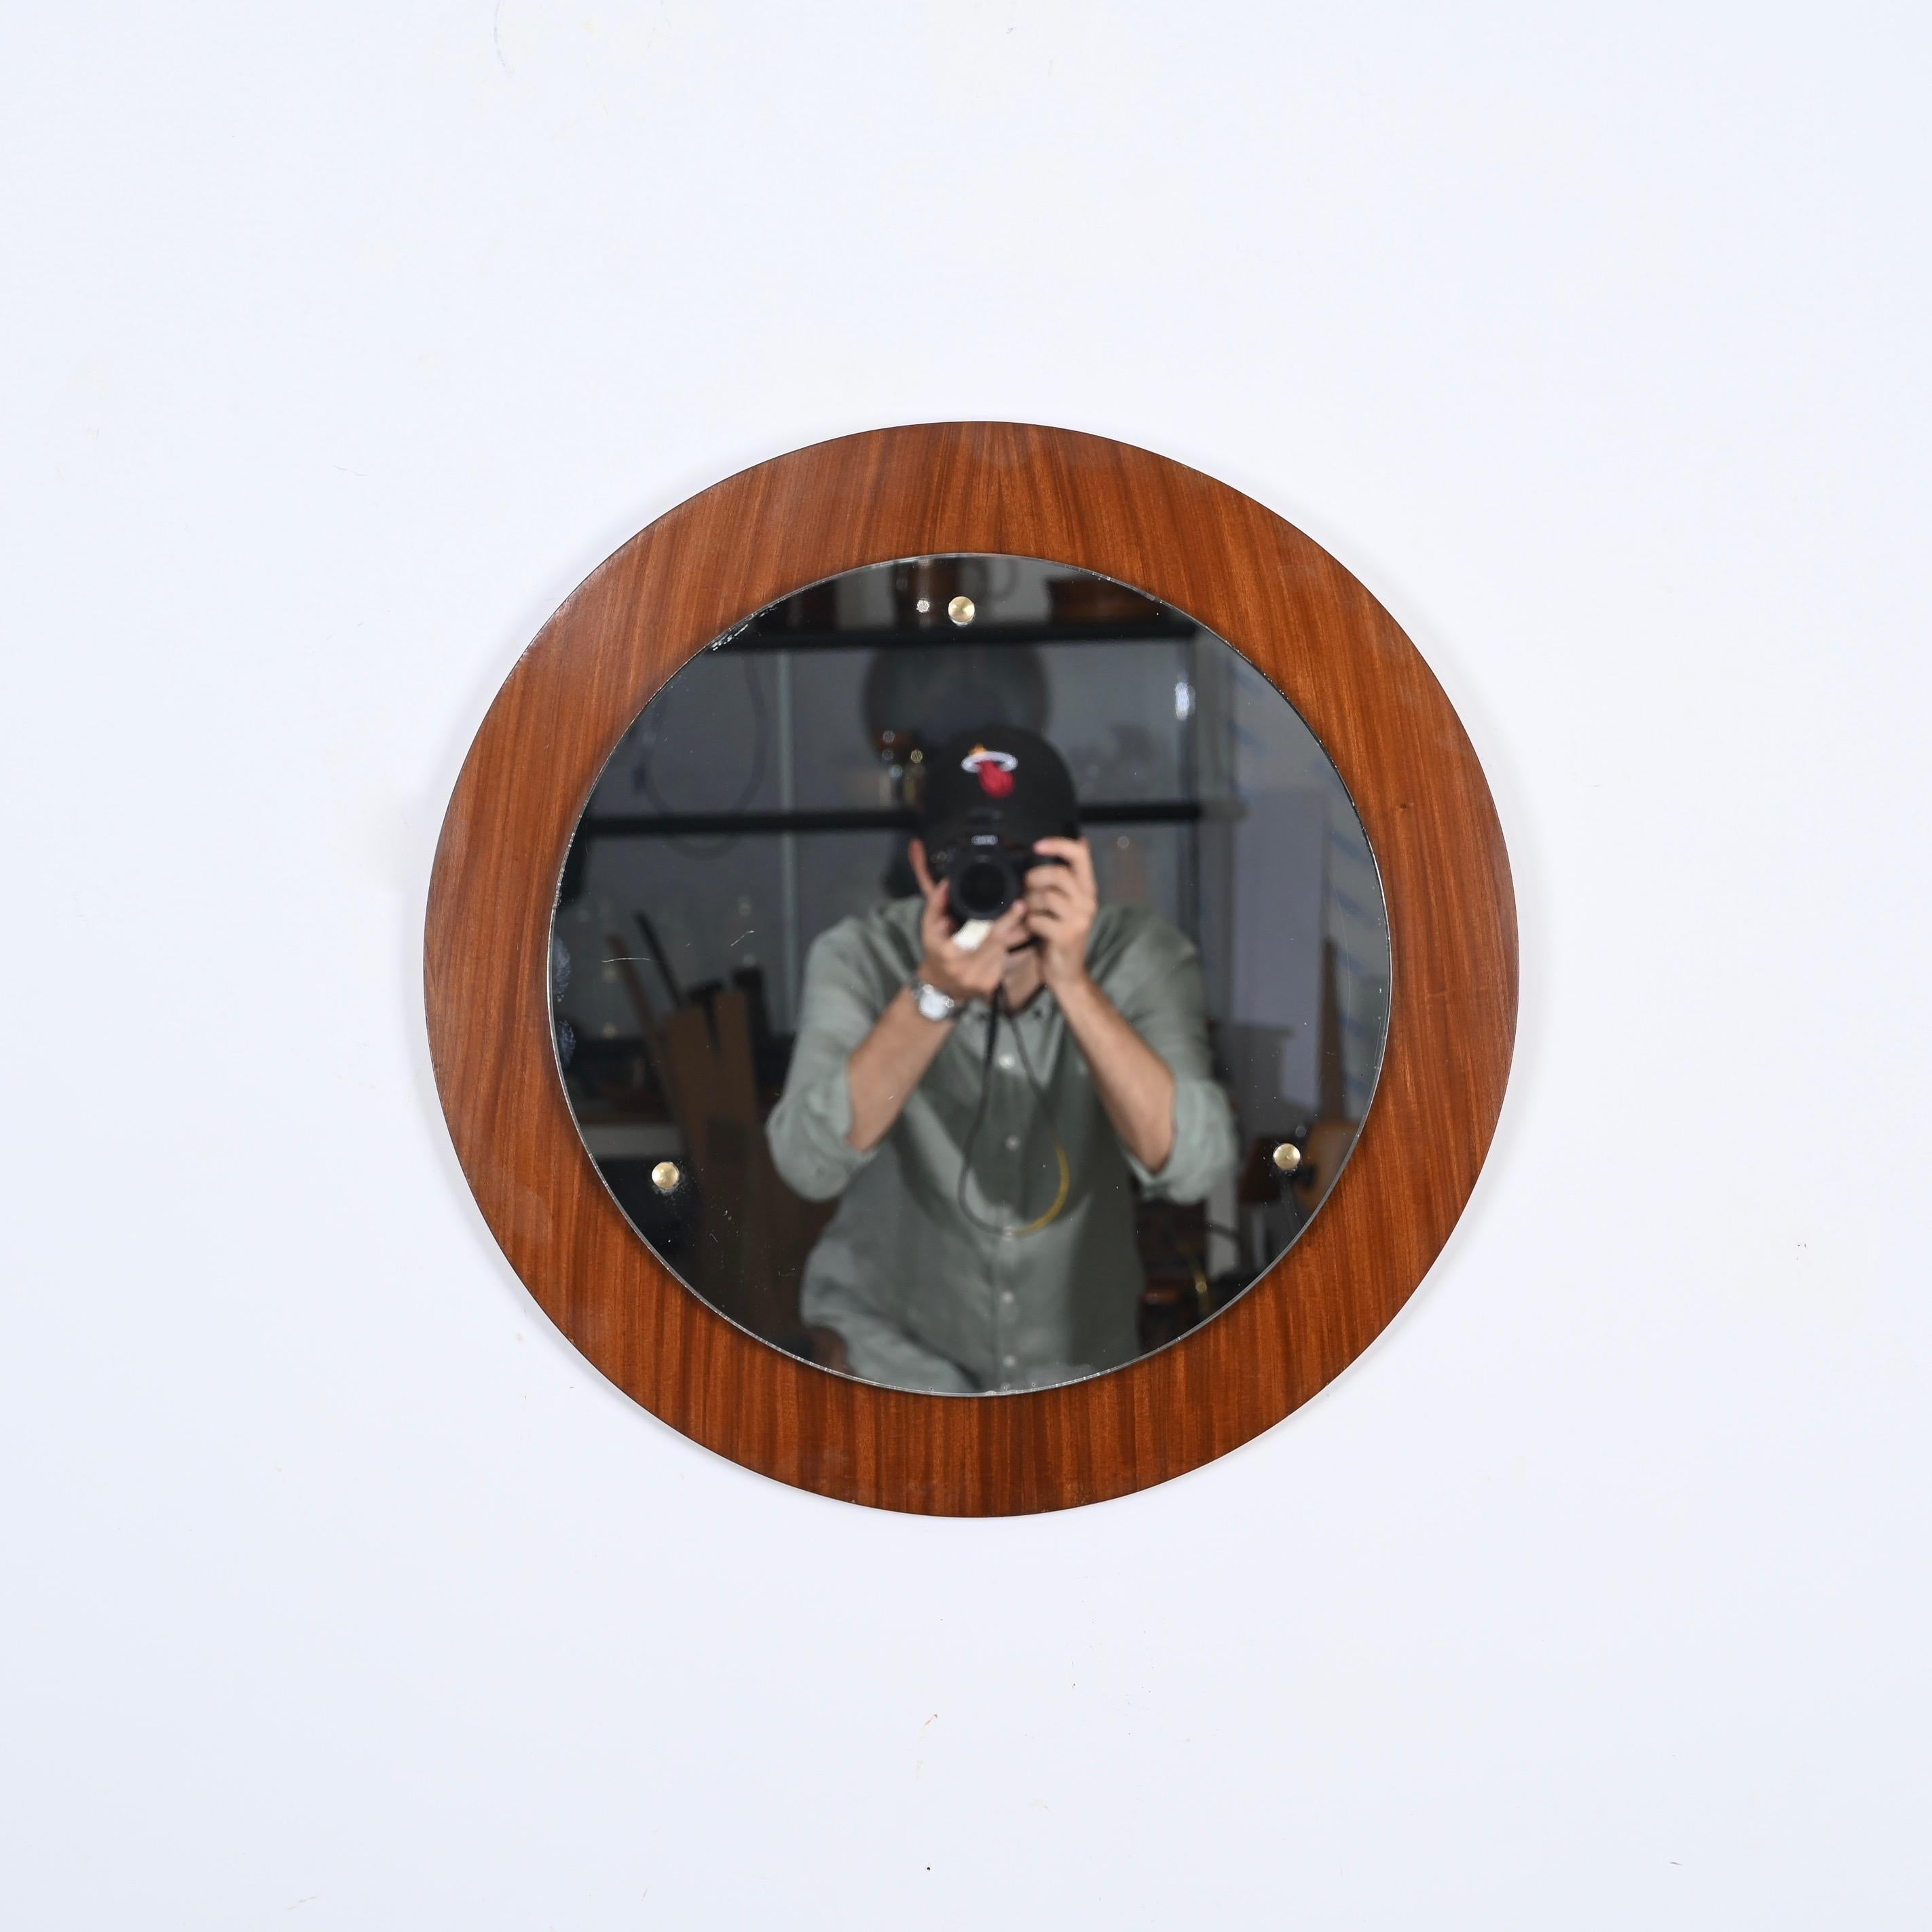 Gorgeous round mirror in teak wood. This beautiful piece was produced in Italy by Creazioni Stilcasa in the 1960s.

The quality of the teak used by Stilcasa is outstanding and is enhanced by the simplicity of the mirror. The mirror is completed by